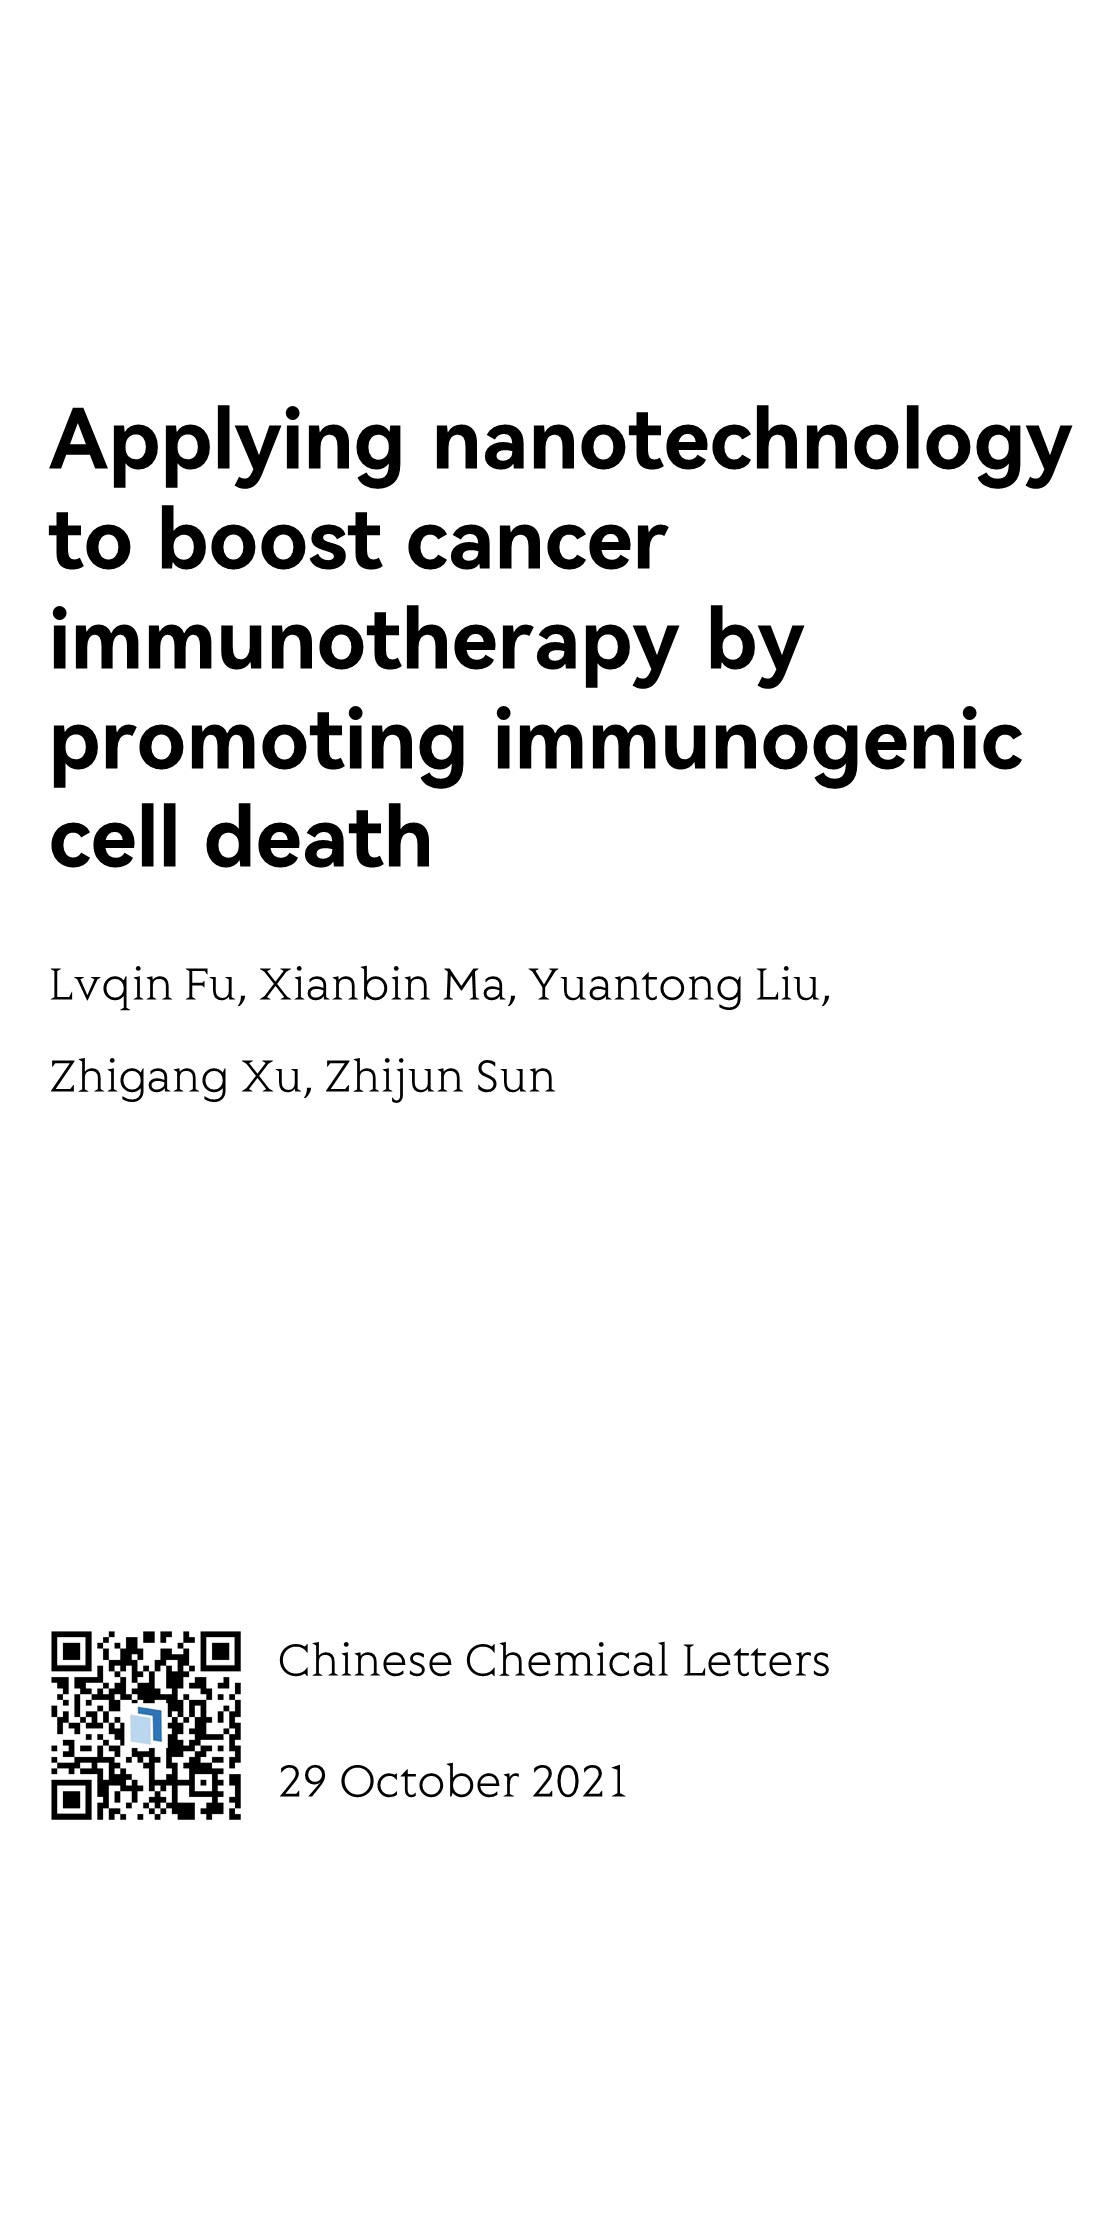 Applying nanotechnology to boost cancer immunotherapy by promoting immunogenic cell death_1